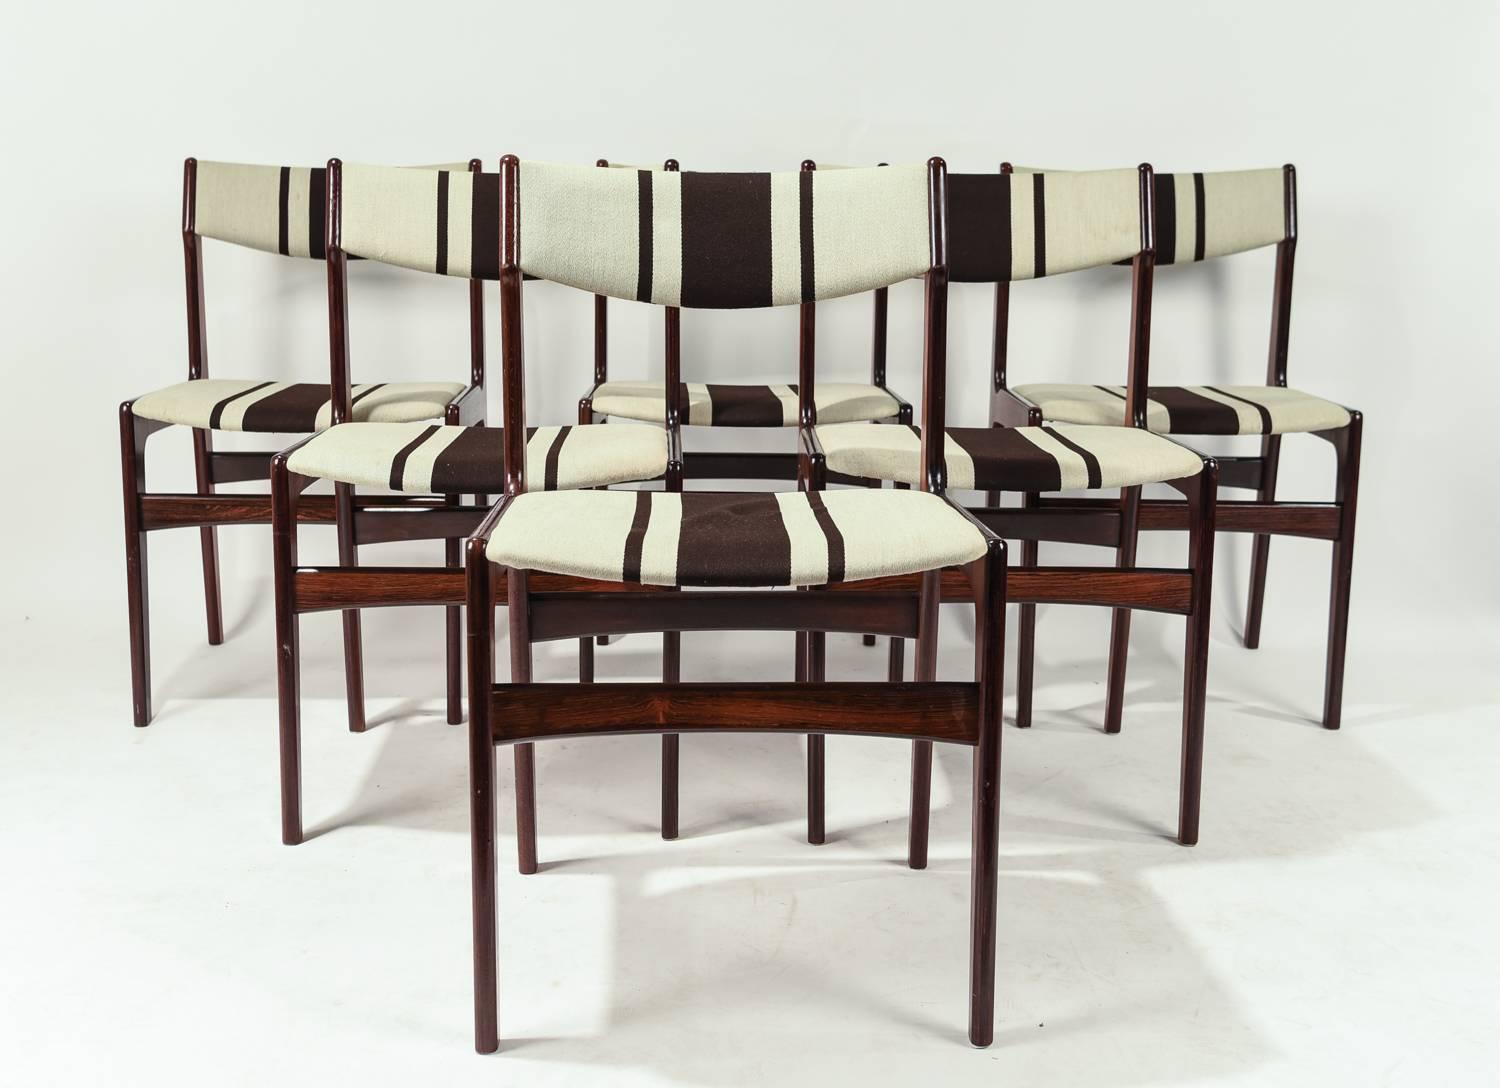 Set of six rosewood side or dining chairs in the manner of Danish Mid-Century designer Erik Buch. Wonderful form and upholstery.